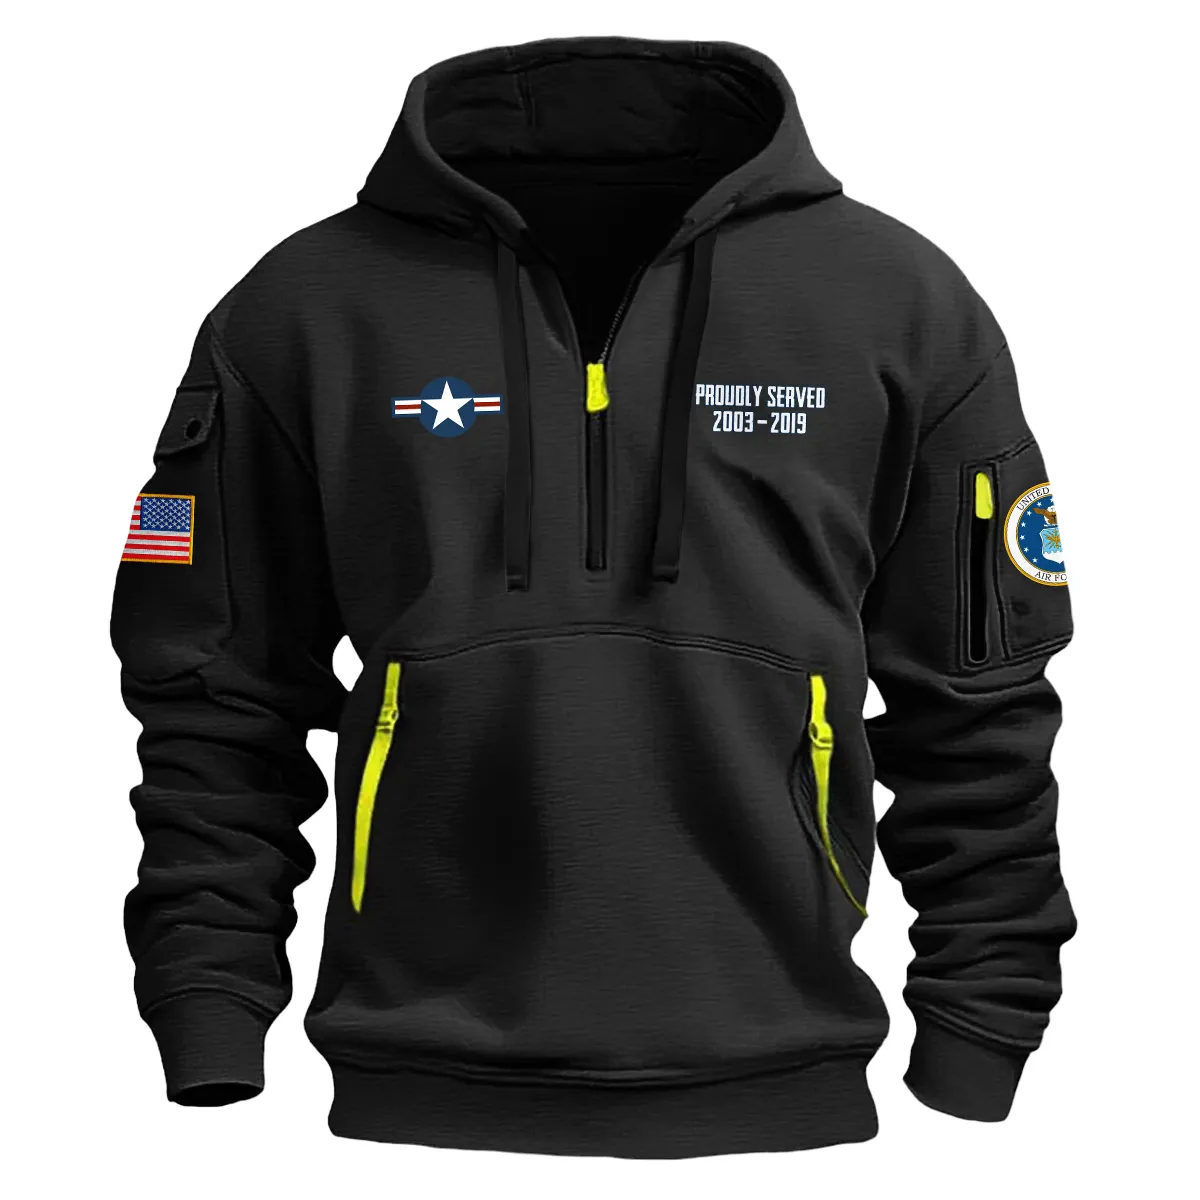 US Military All Branches! Personalized Gift E7A-MSGT U.S. Air Force Fashion Hoodie Half Zipper